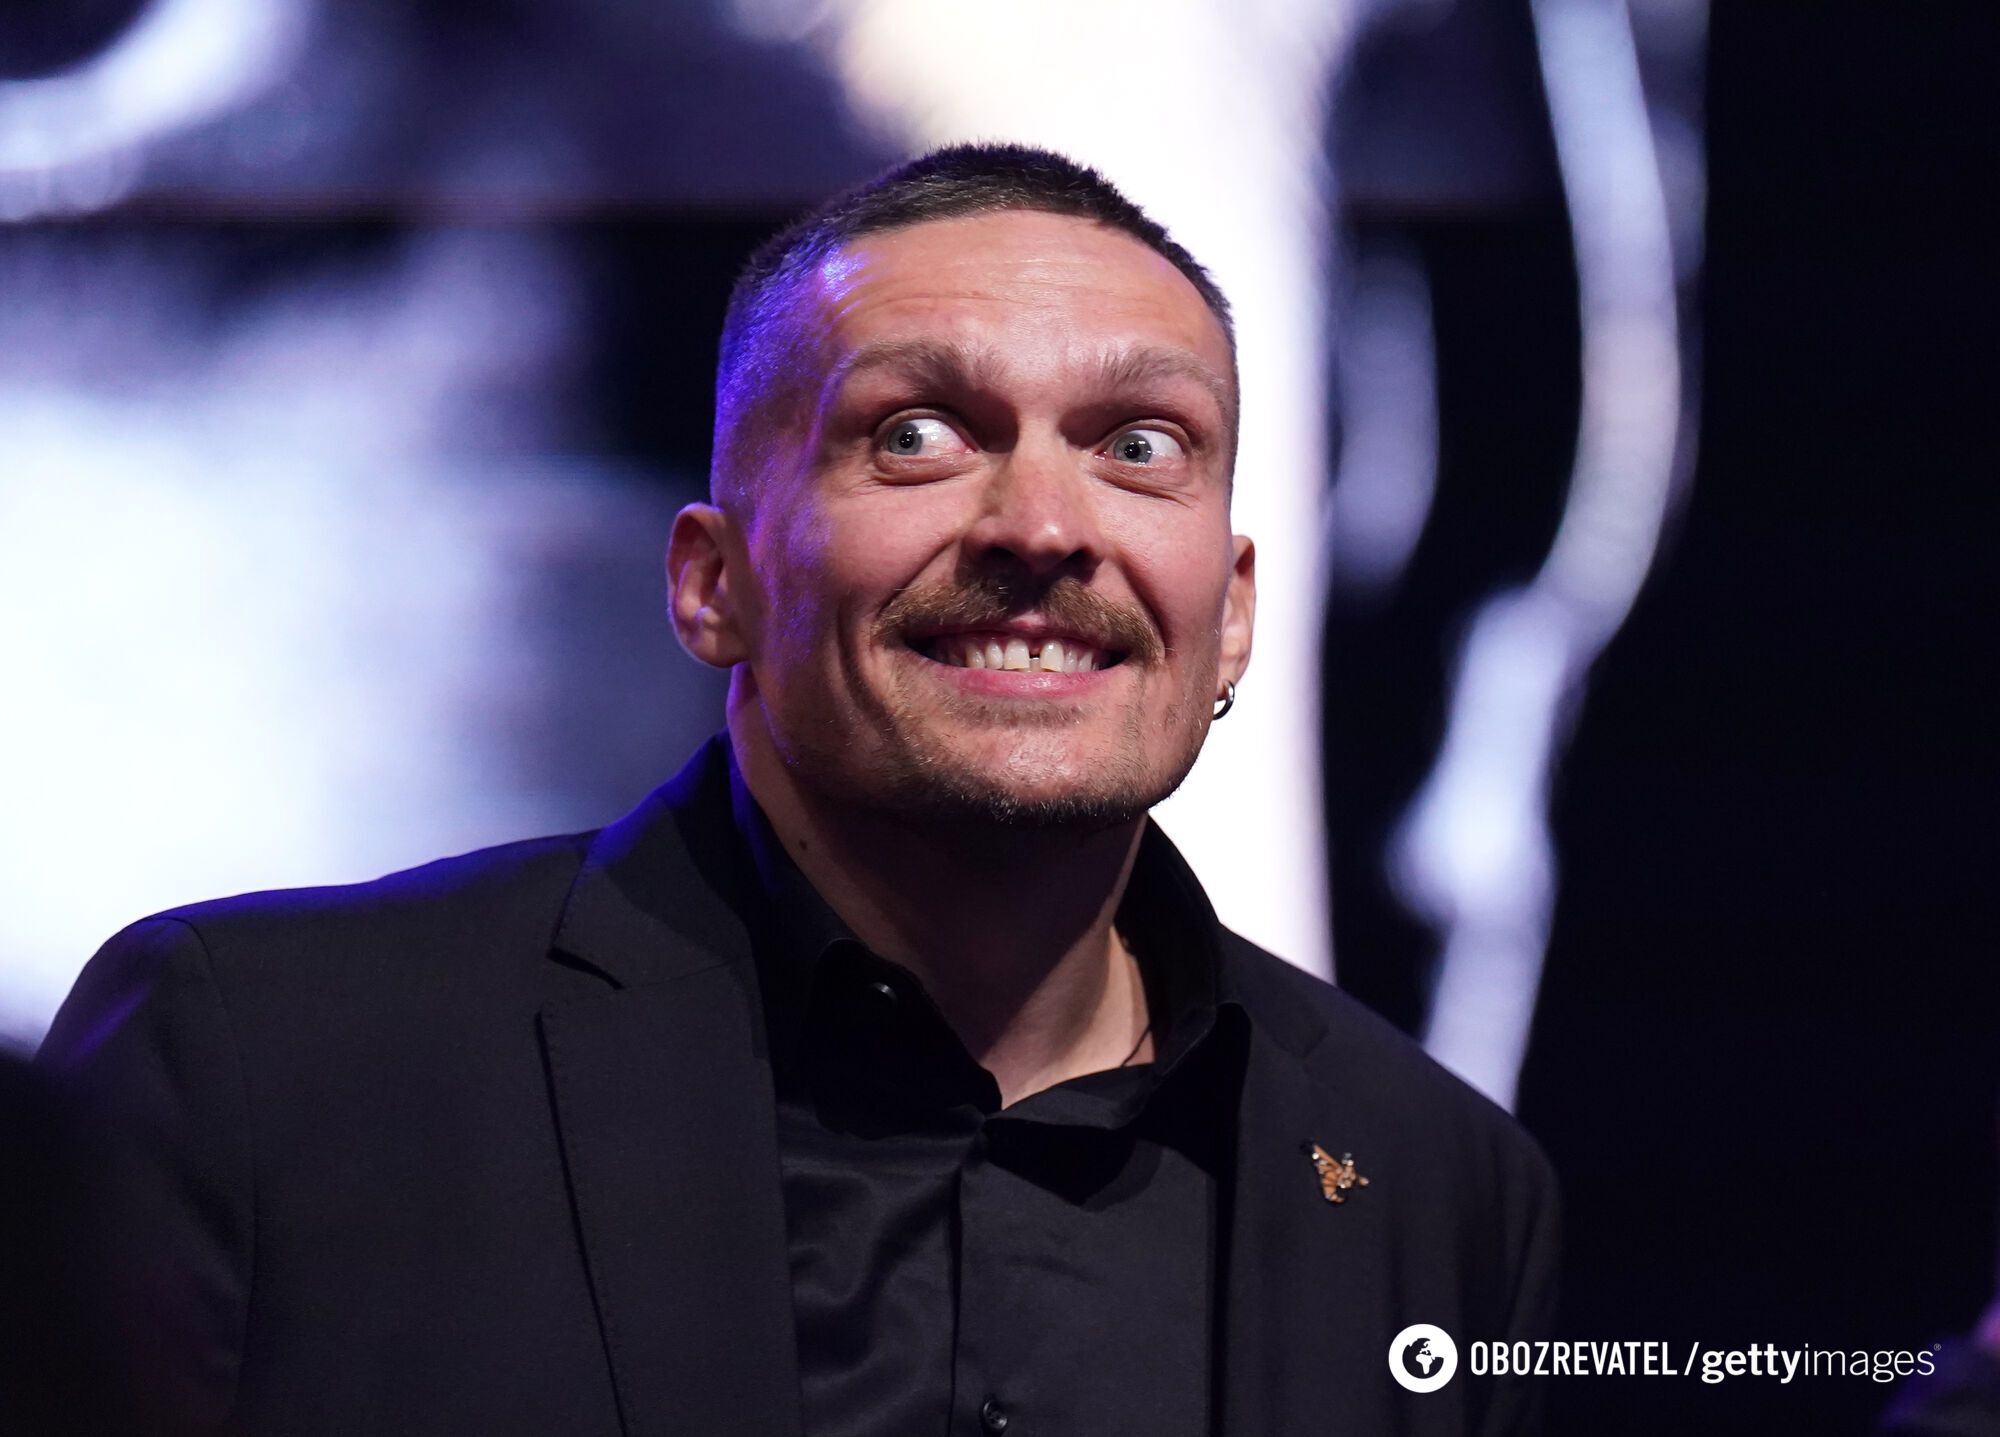 Saudi Arabia announces date for Usyk-Fury rematch